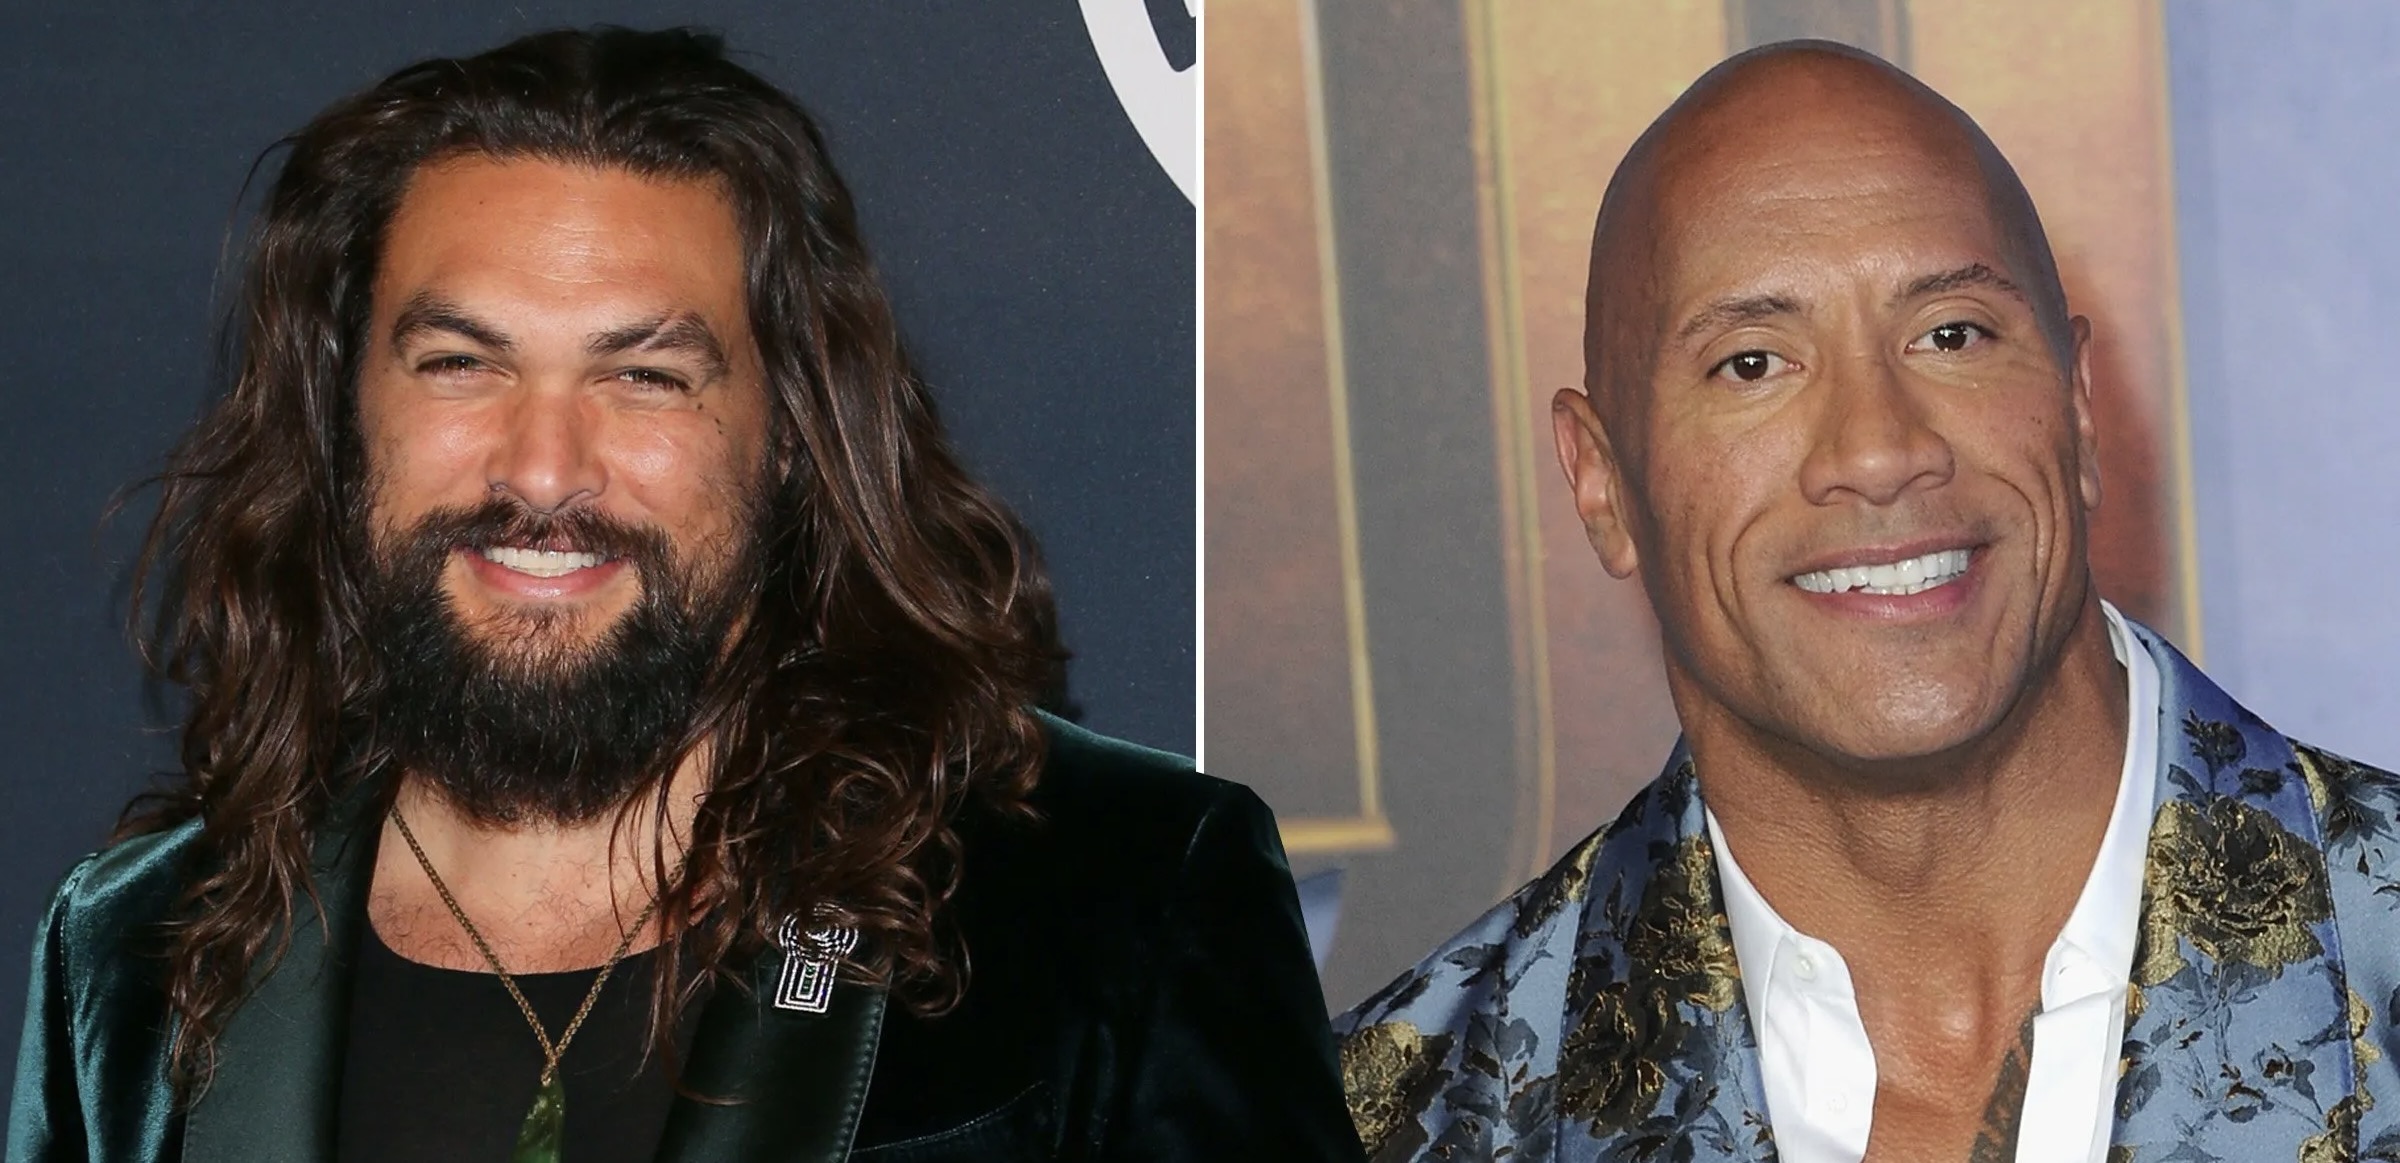 The Rock & Jason Momoa Speak Out on Maui Fires, Offer Ways to Help